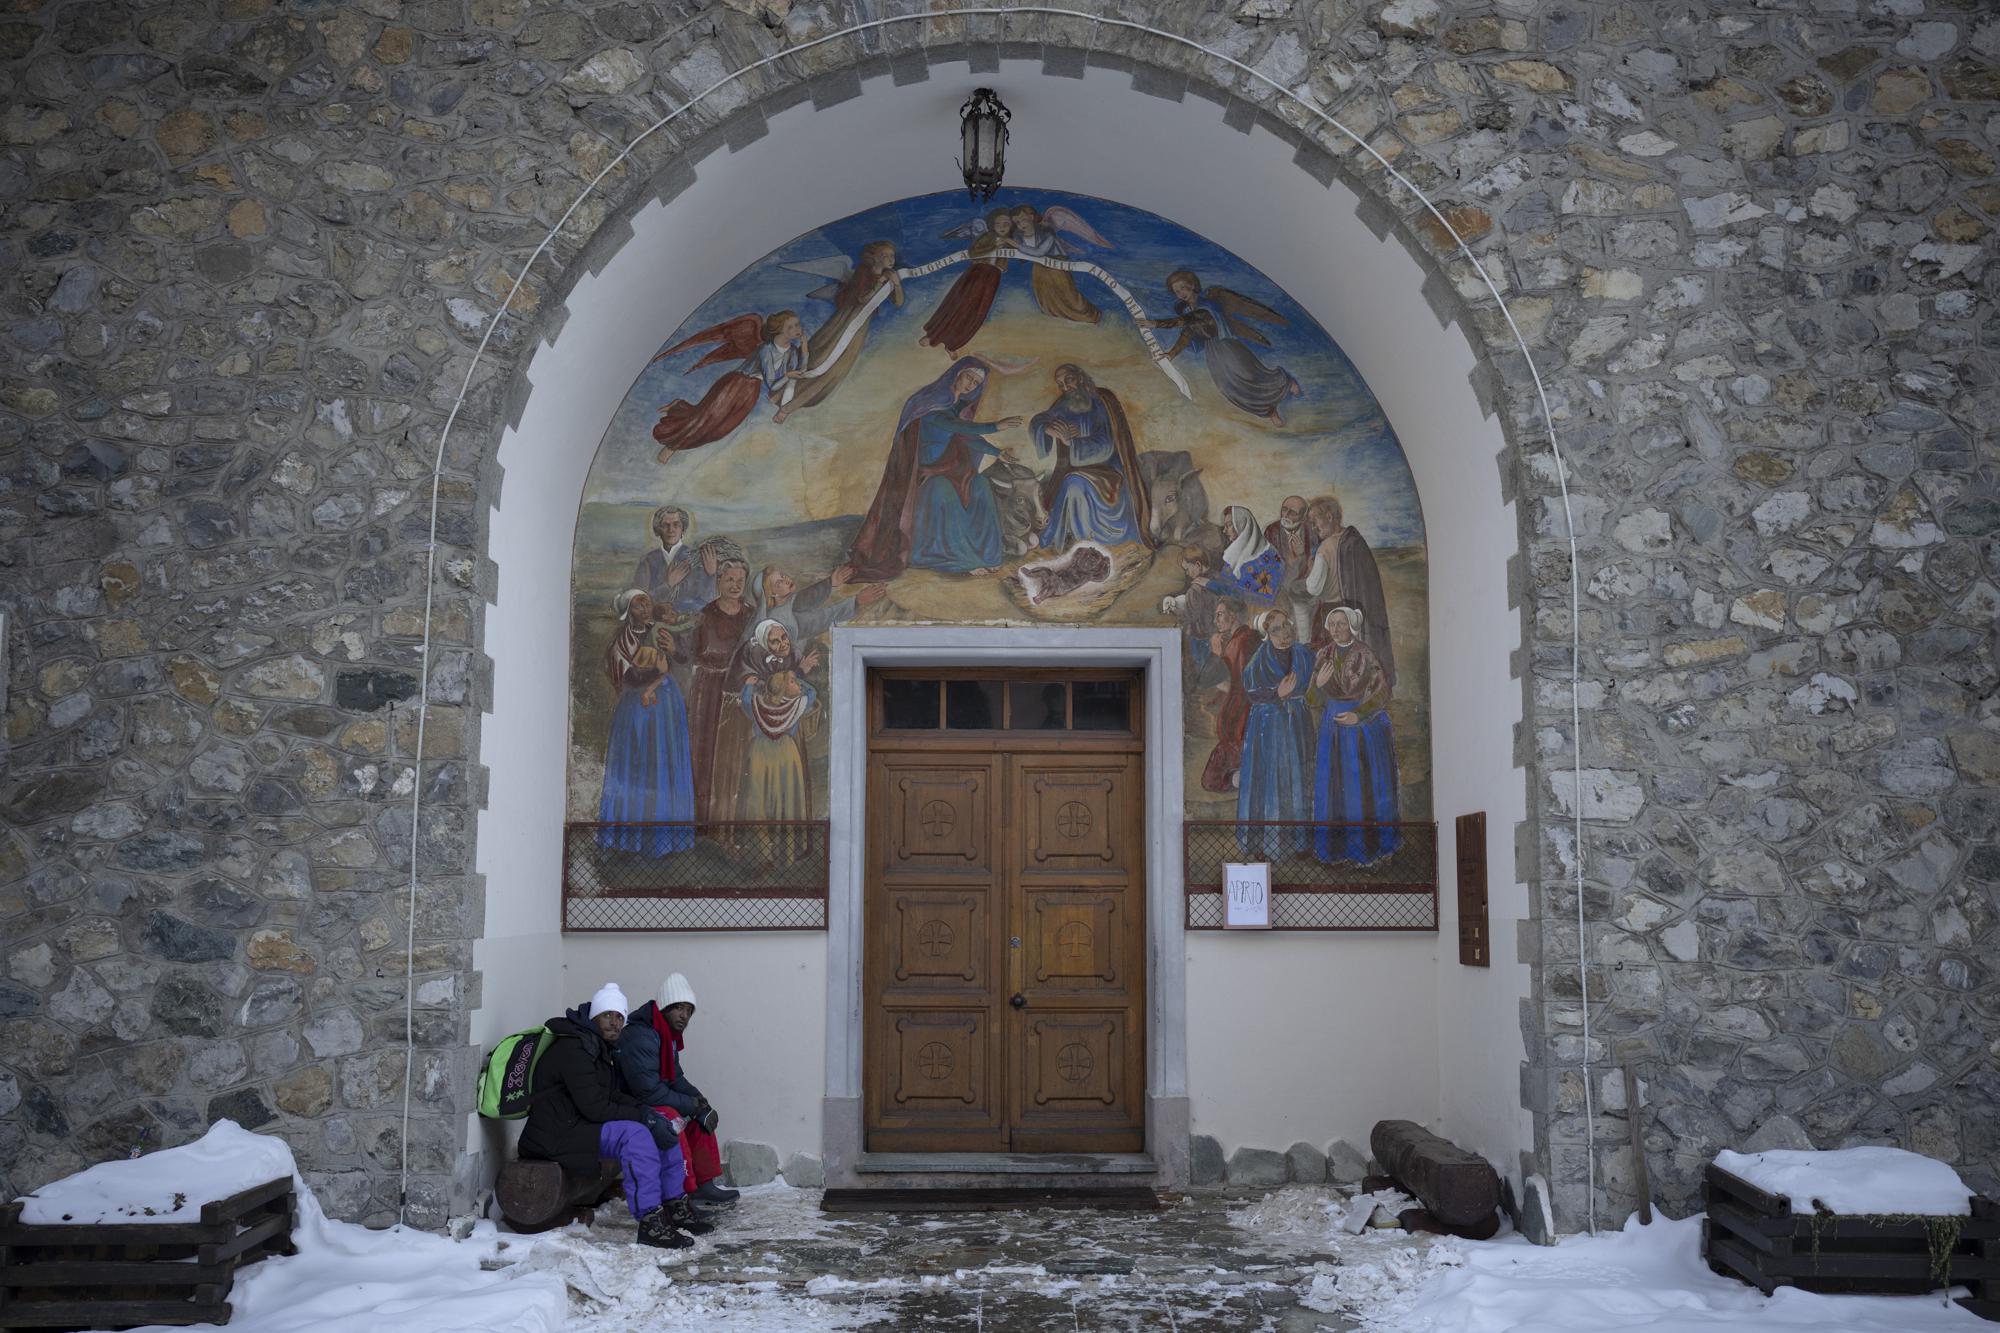 Ethiopian migrants take shelter under a church entrance in the Italian border town of Claviere before attempting to cross into the French Alps, Monday, Dec. 13, 2021. (AP Photo/Daniel Cole)